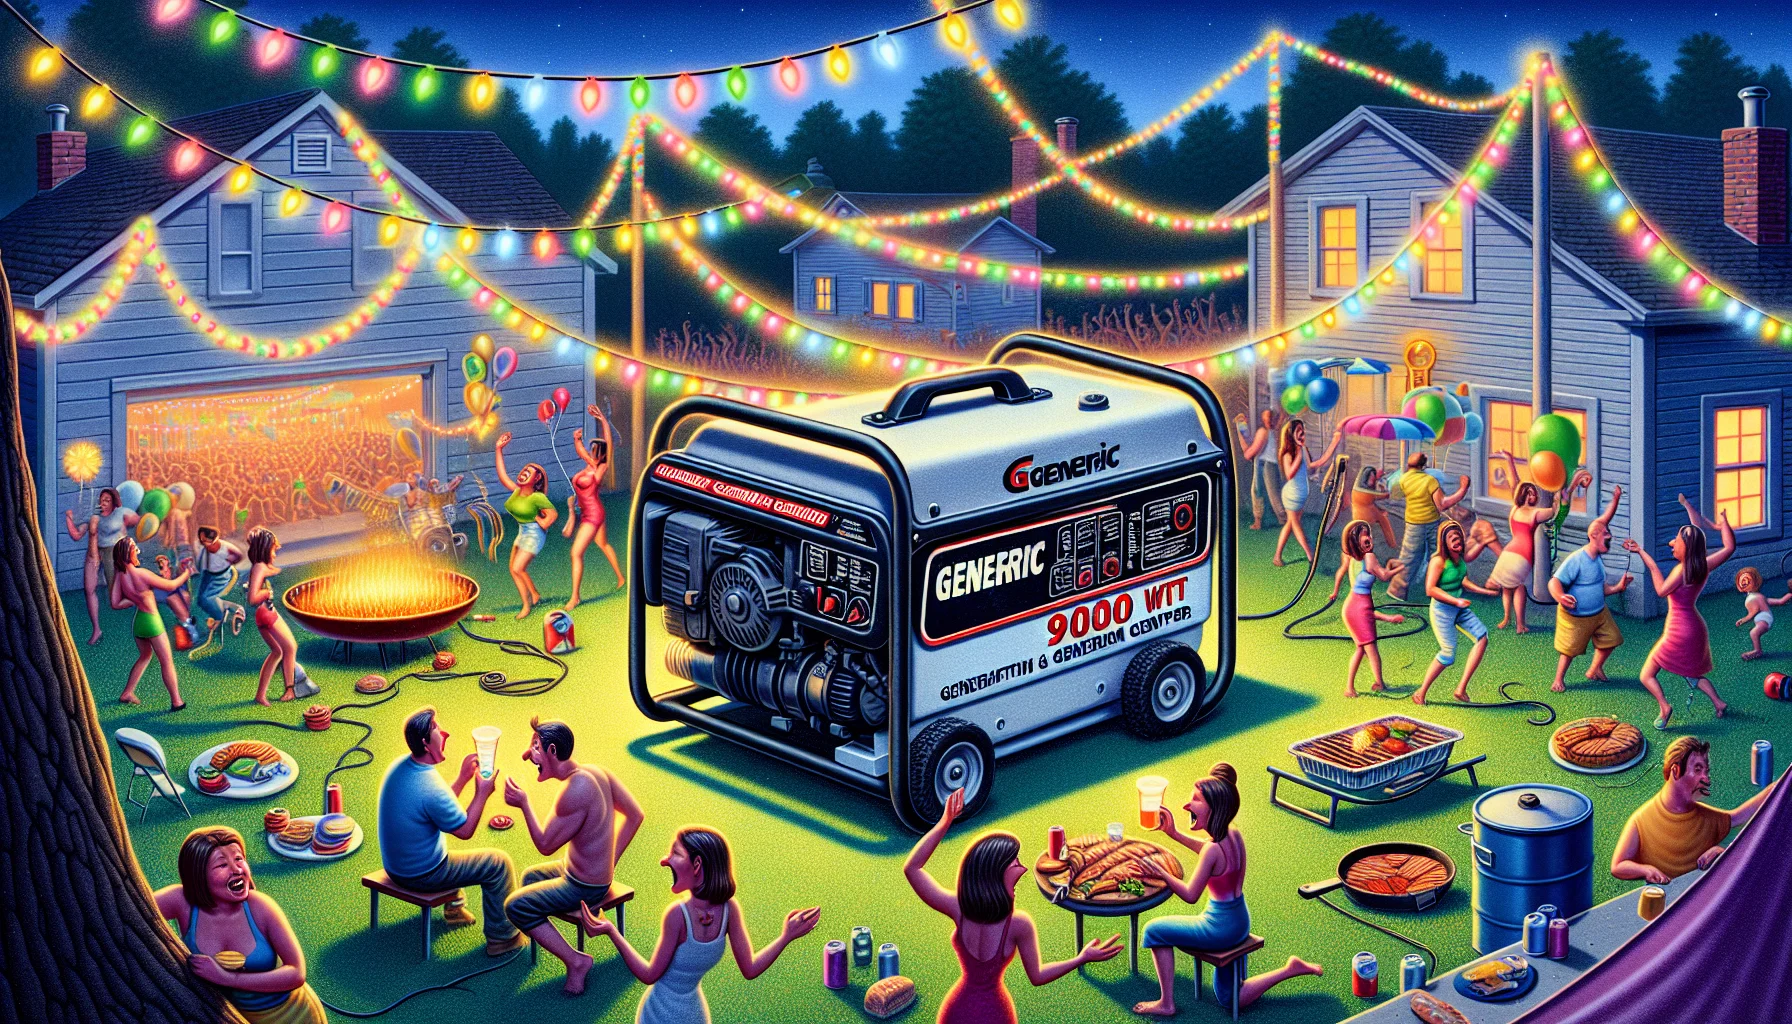 Create a detailed and realistic image showcasing a powerful, generic 9000-watt generator in a humorous scene. Emphasize the significance of generating electricity. Perhaps, show the generator powering a celebratory backyard party. Visual hint: festive, colorful lights strung from trees and houses, people laughing and enjoying music, delicious food being cooked using electric grills, but everything is all coming from this one large generator. The humor could come from the exaggeration of everything that is powered by the generator, including perhaps a mini carnival ride or a band with oversized electric guitars.